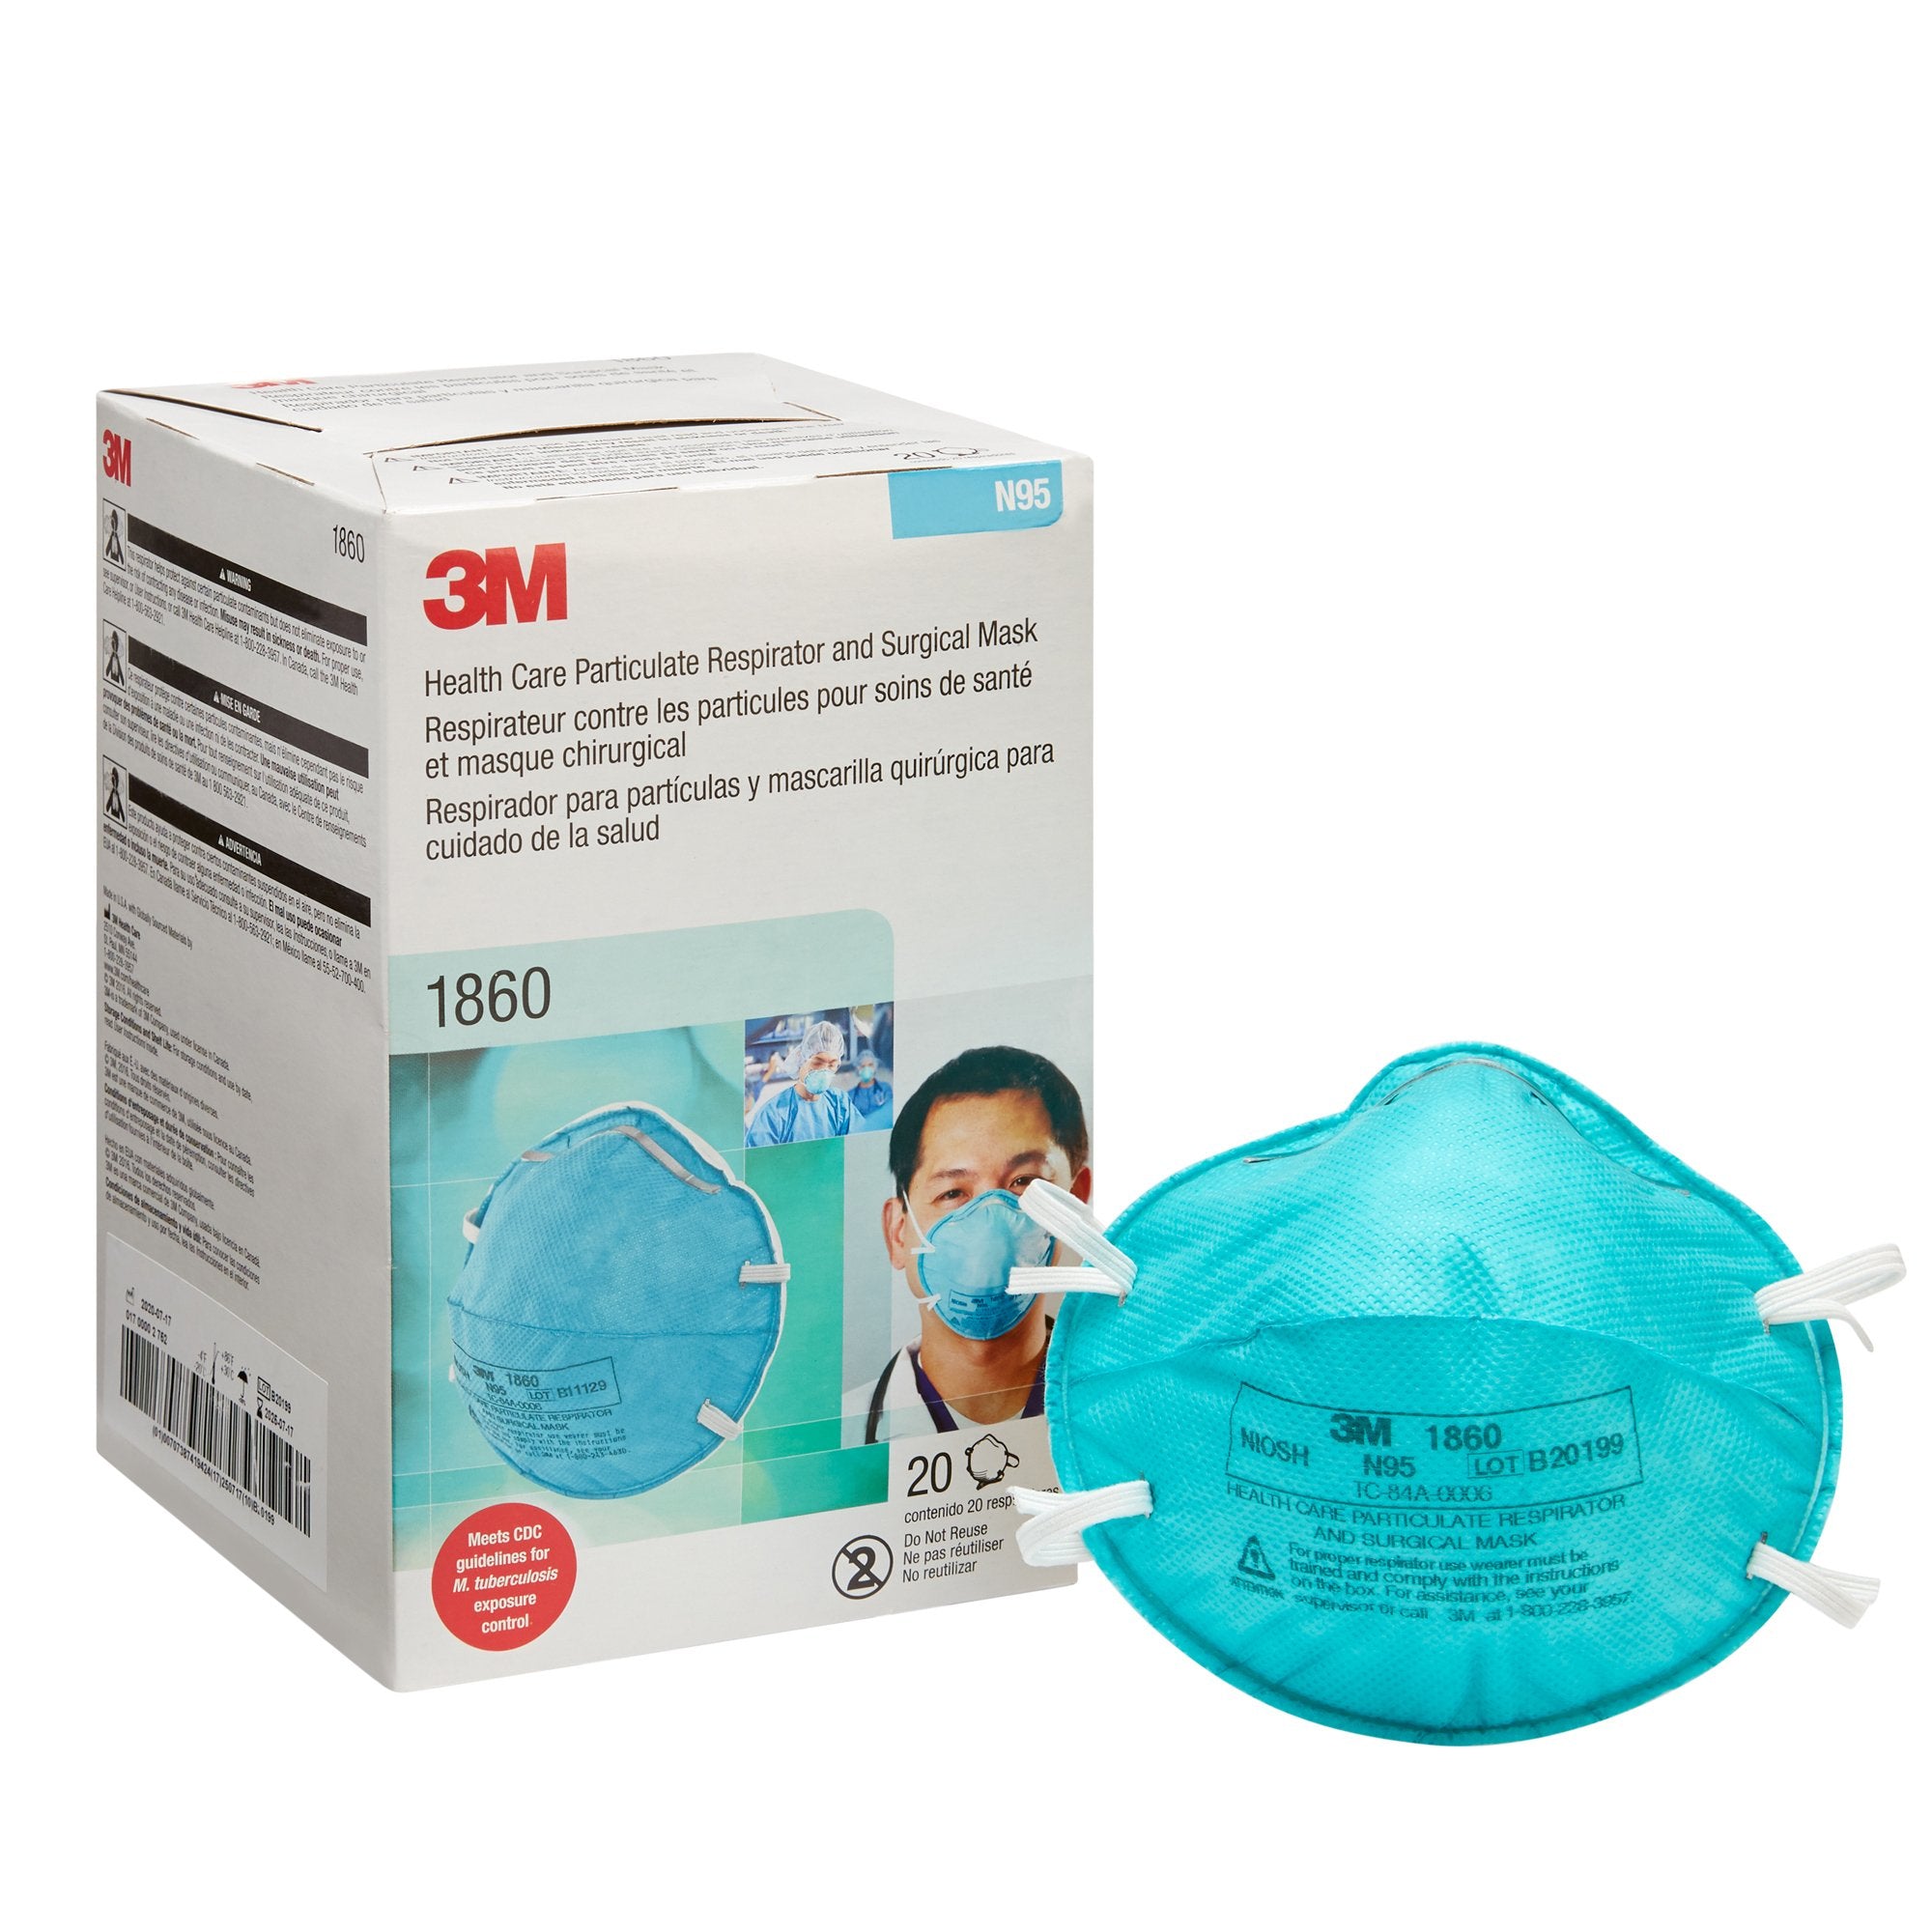 Particulate Respirator / Surgical Mask 3M Medical N95 Cup Elastic Strap One Size Fits Most Blue NonSterile ASTM F1862 Adult